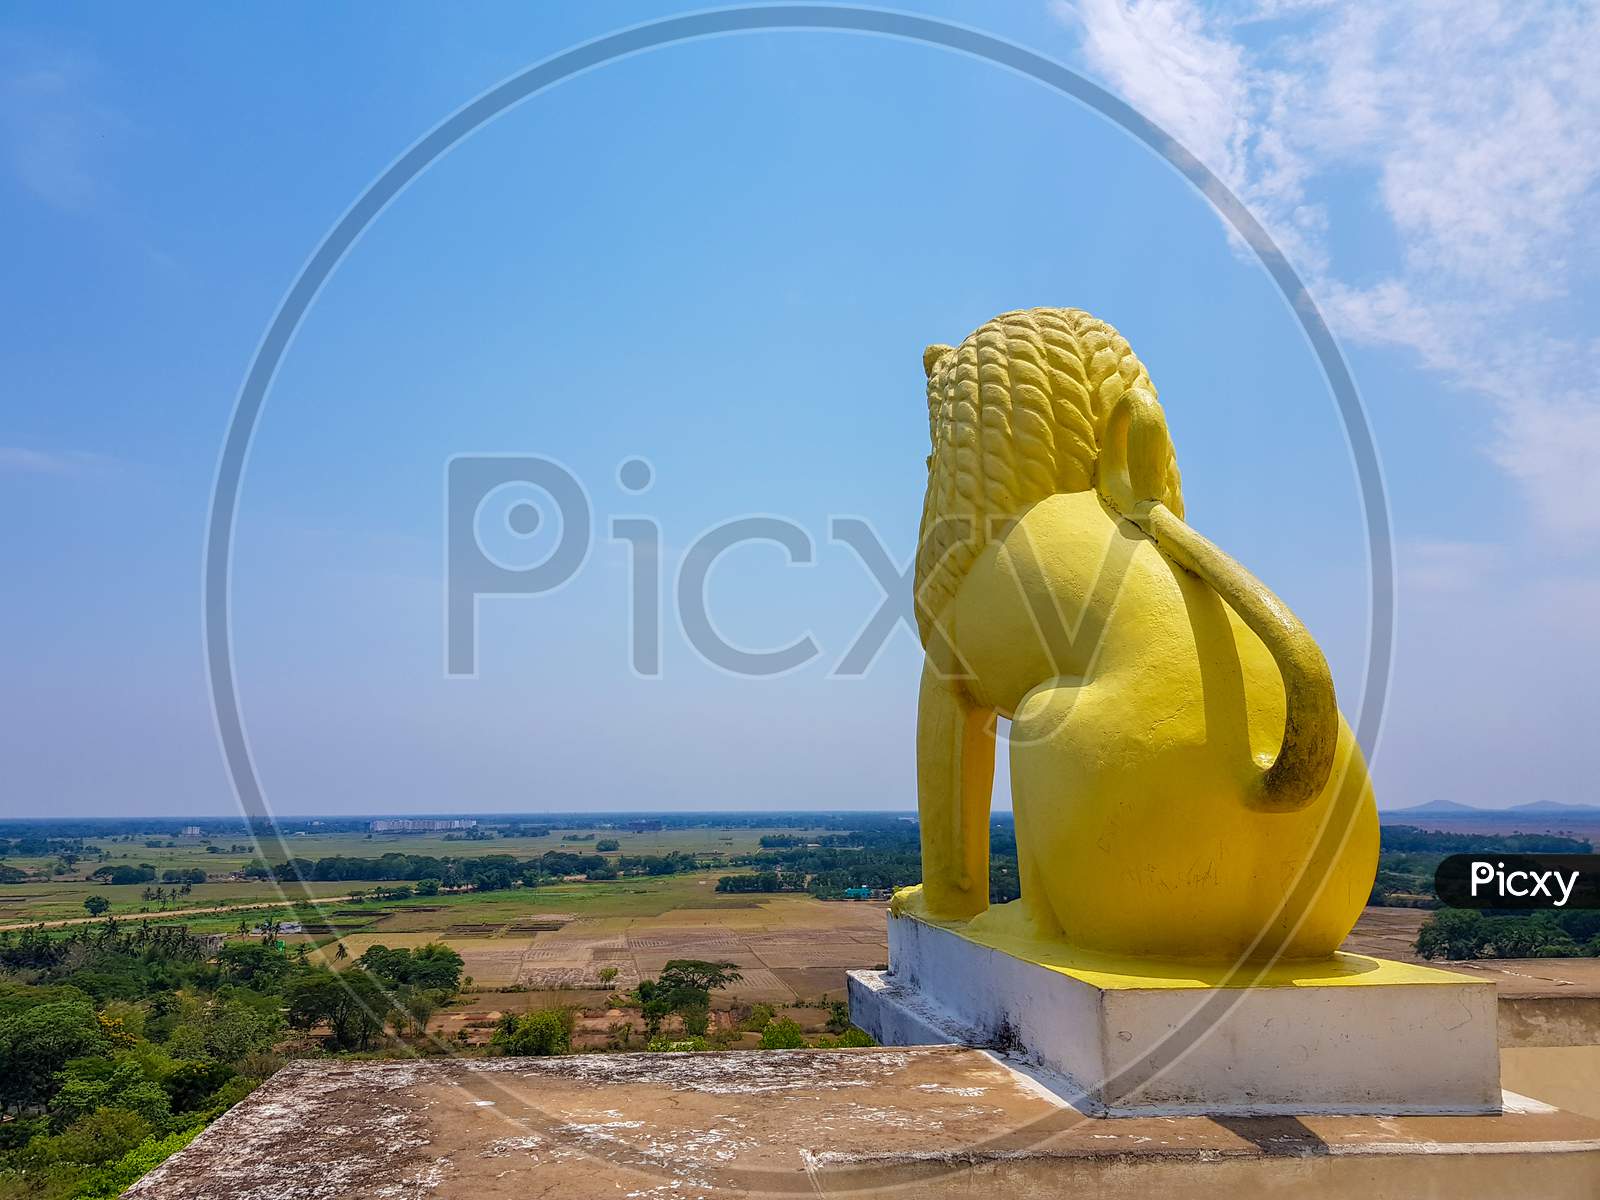 Skyline Of Odisa And Golden Lion Statue At Theview Point Of Dhauli Shanti Stupa At Odisha,India